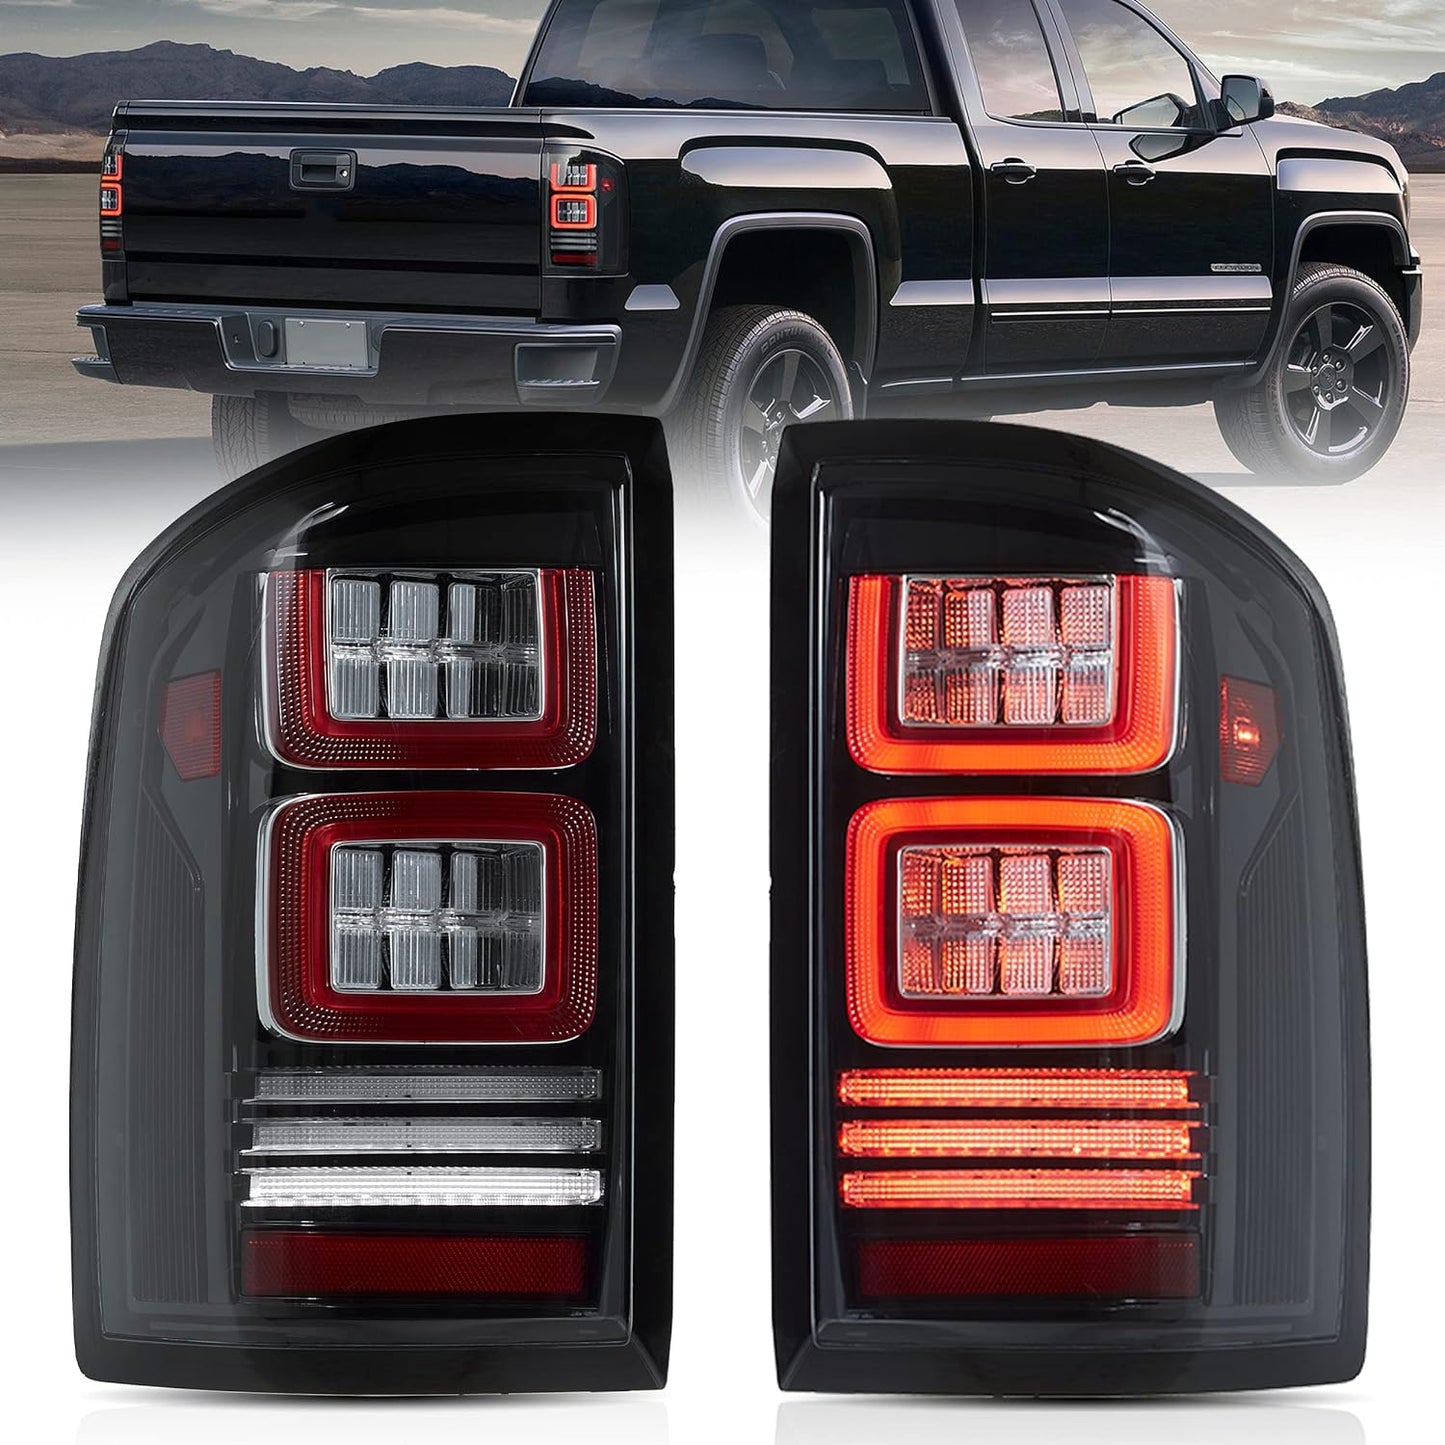 LED Tail lights Fit for GMC Sierra 1500/2500HD/3500HD 2014-2018